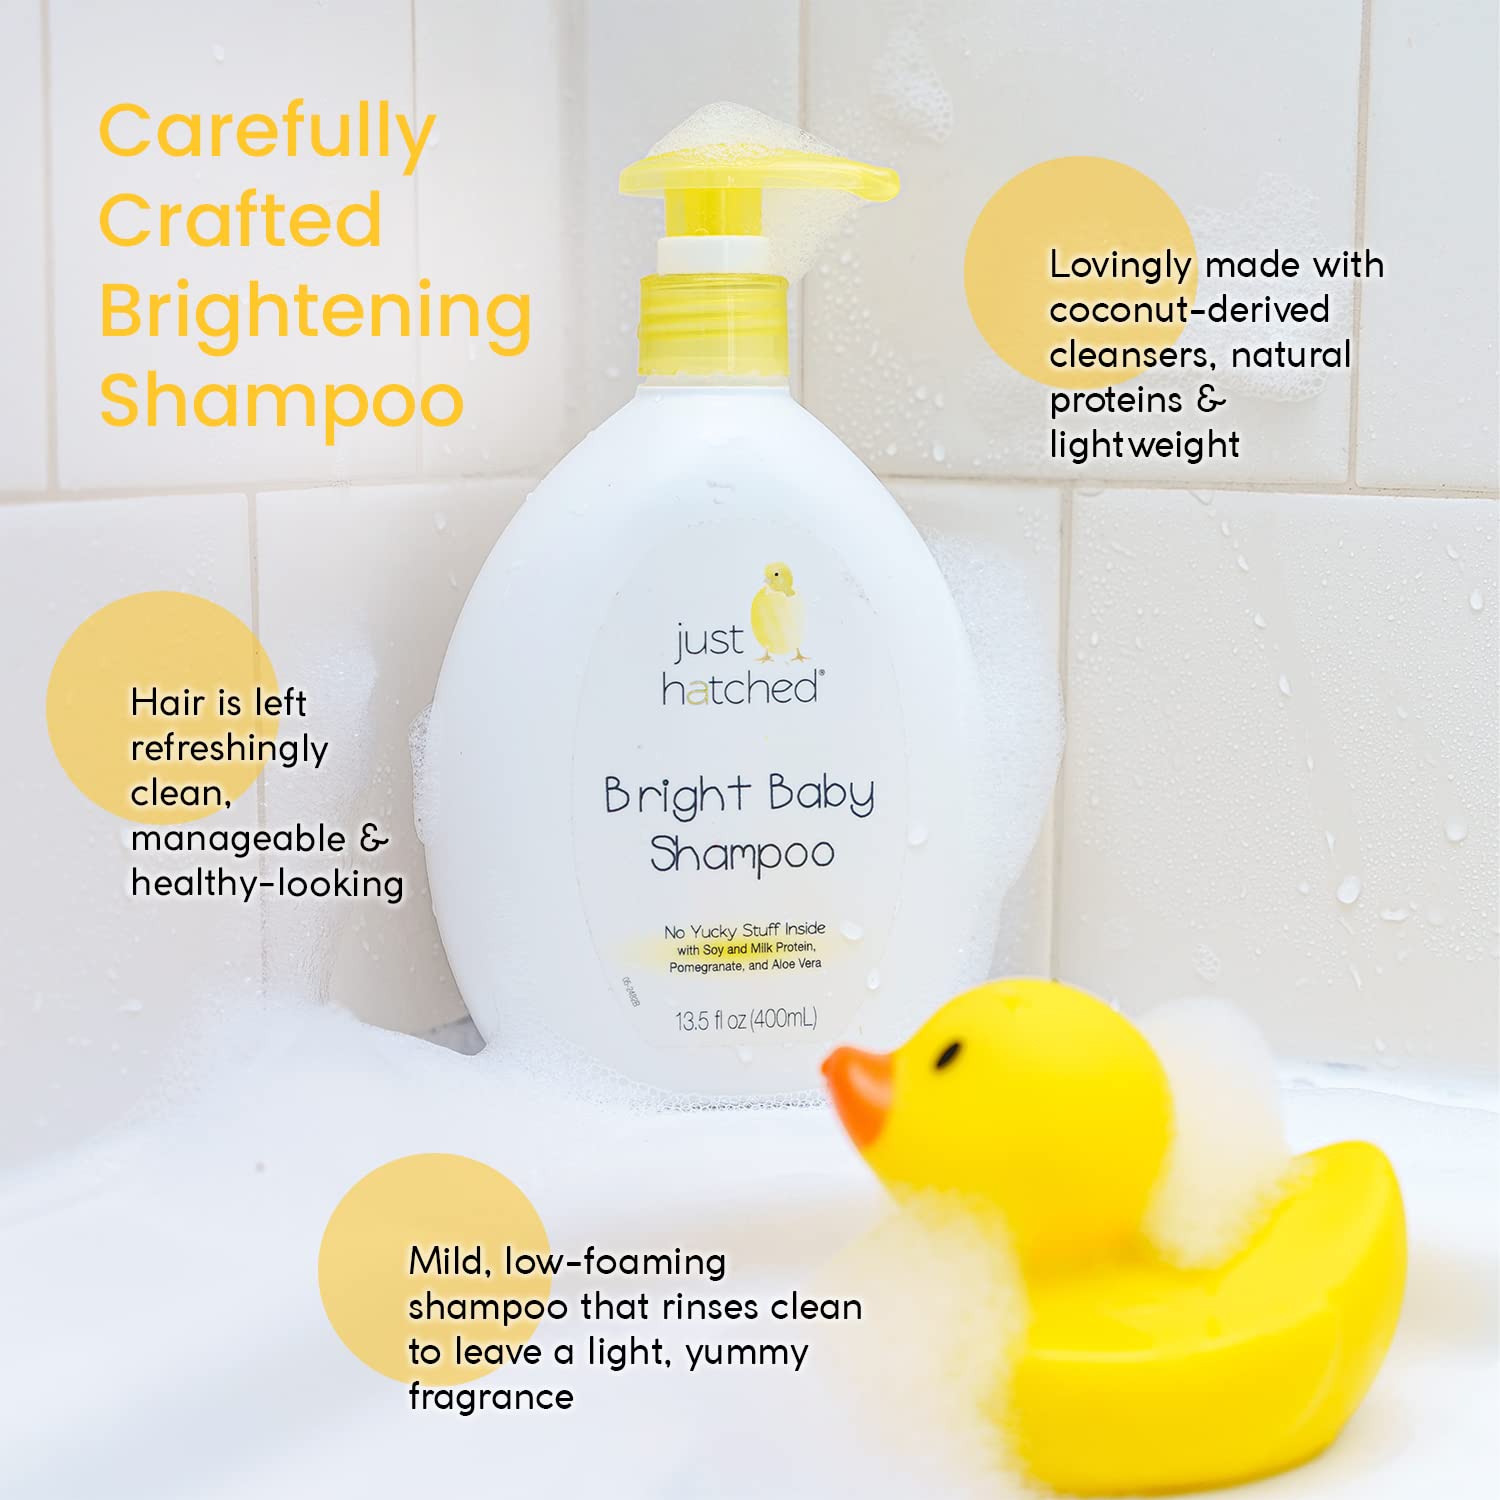 Just Hatched Bright Baby Shampoo Single-Pack - Gentle Hair Cleanser, Loveable Yummy Fragrance, Gentle for Newborns, Hypoallergenic, Gluten Free, No Yucky Stuff & Harsh Ingredients, 13.5 fl oz (1 Pack)